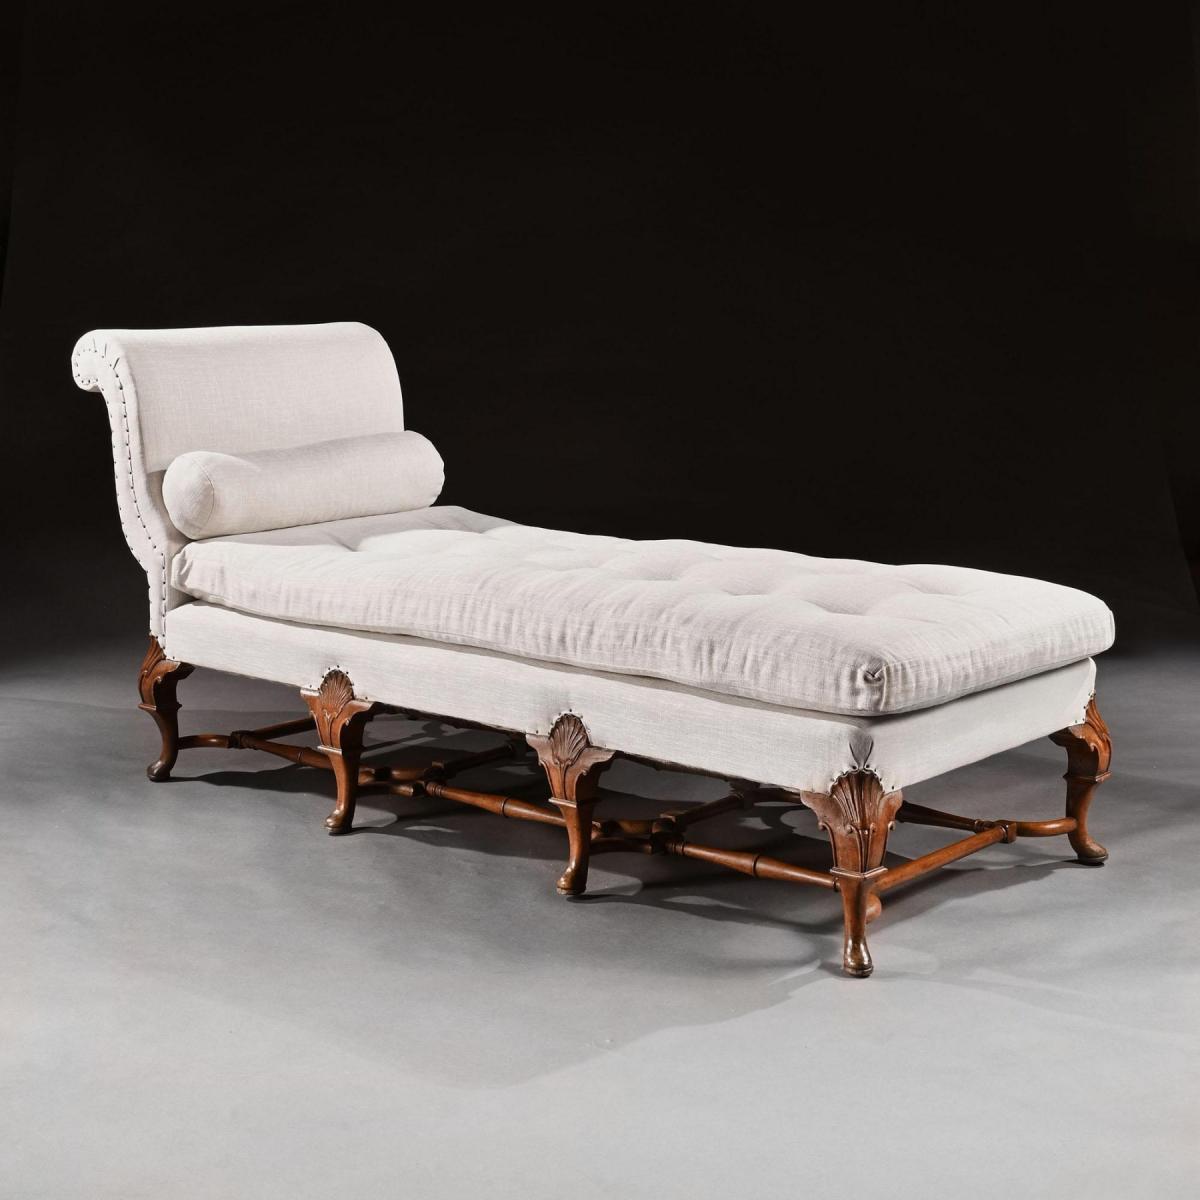 Early 20th Century Walnut and Linen Upholstered Daybed in the Queen Anne Taste 